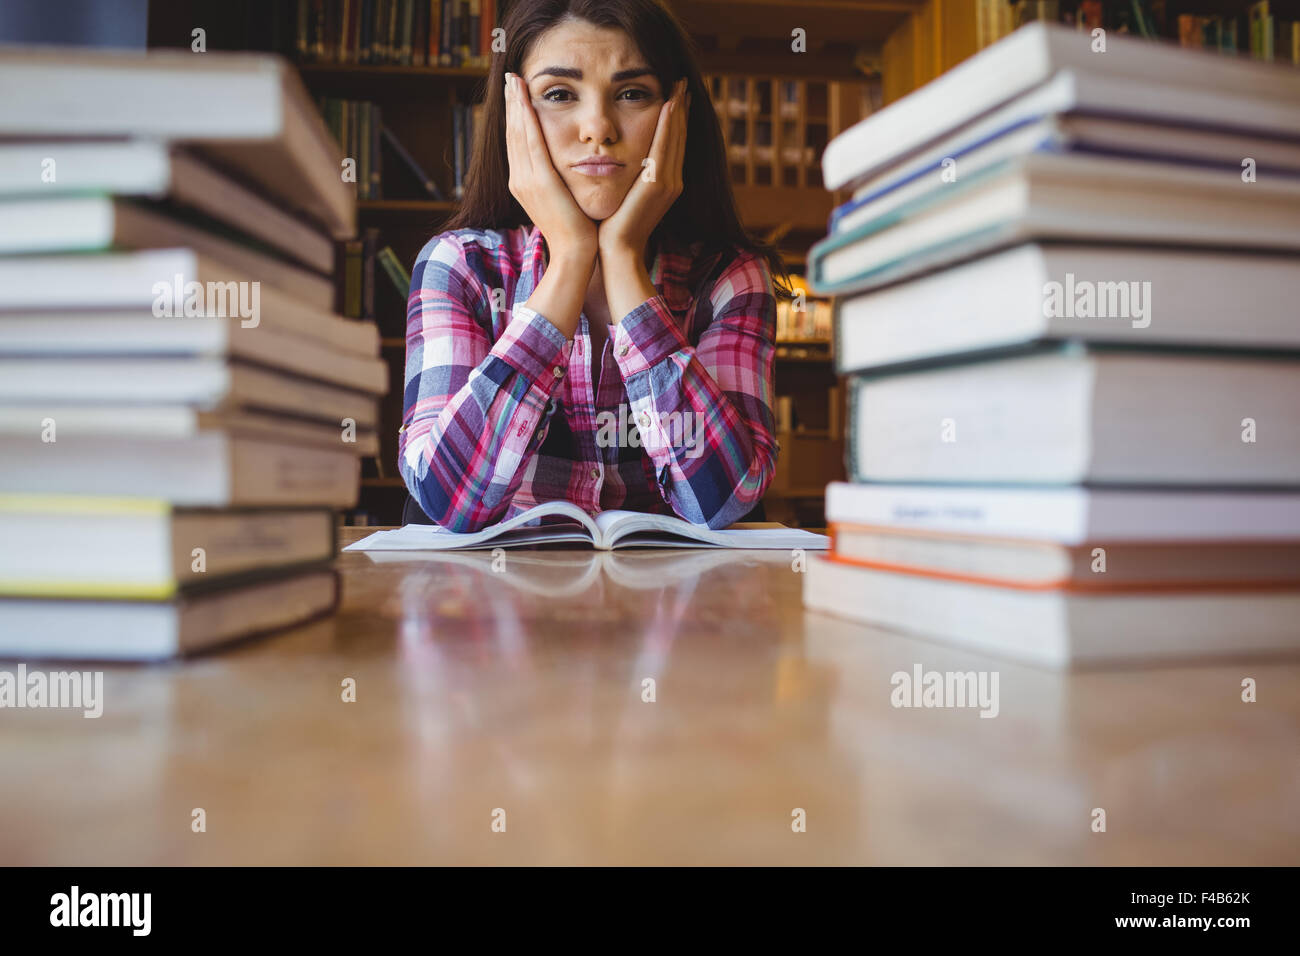 Frustrated female student at desk Stock Photo